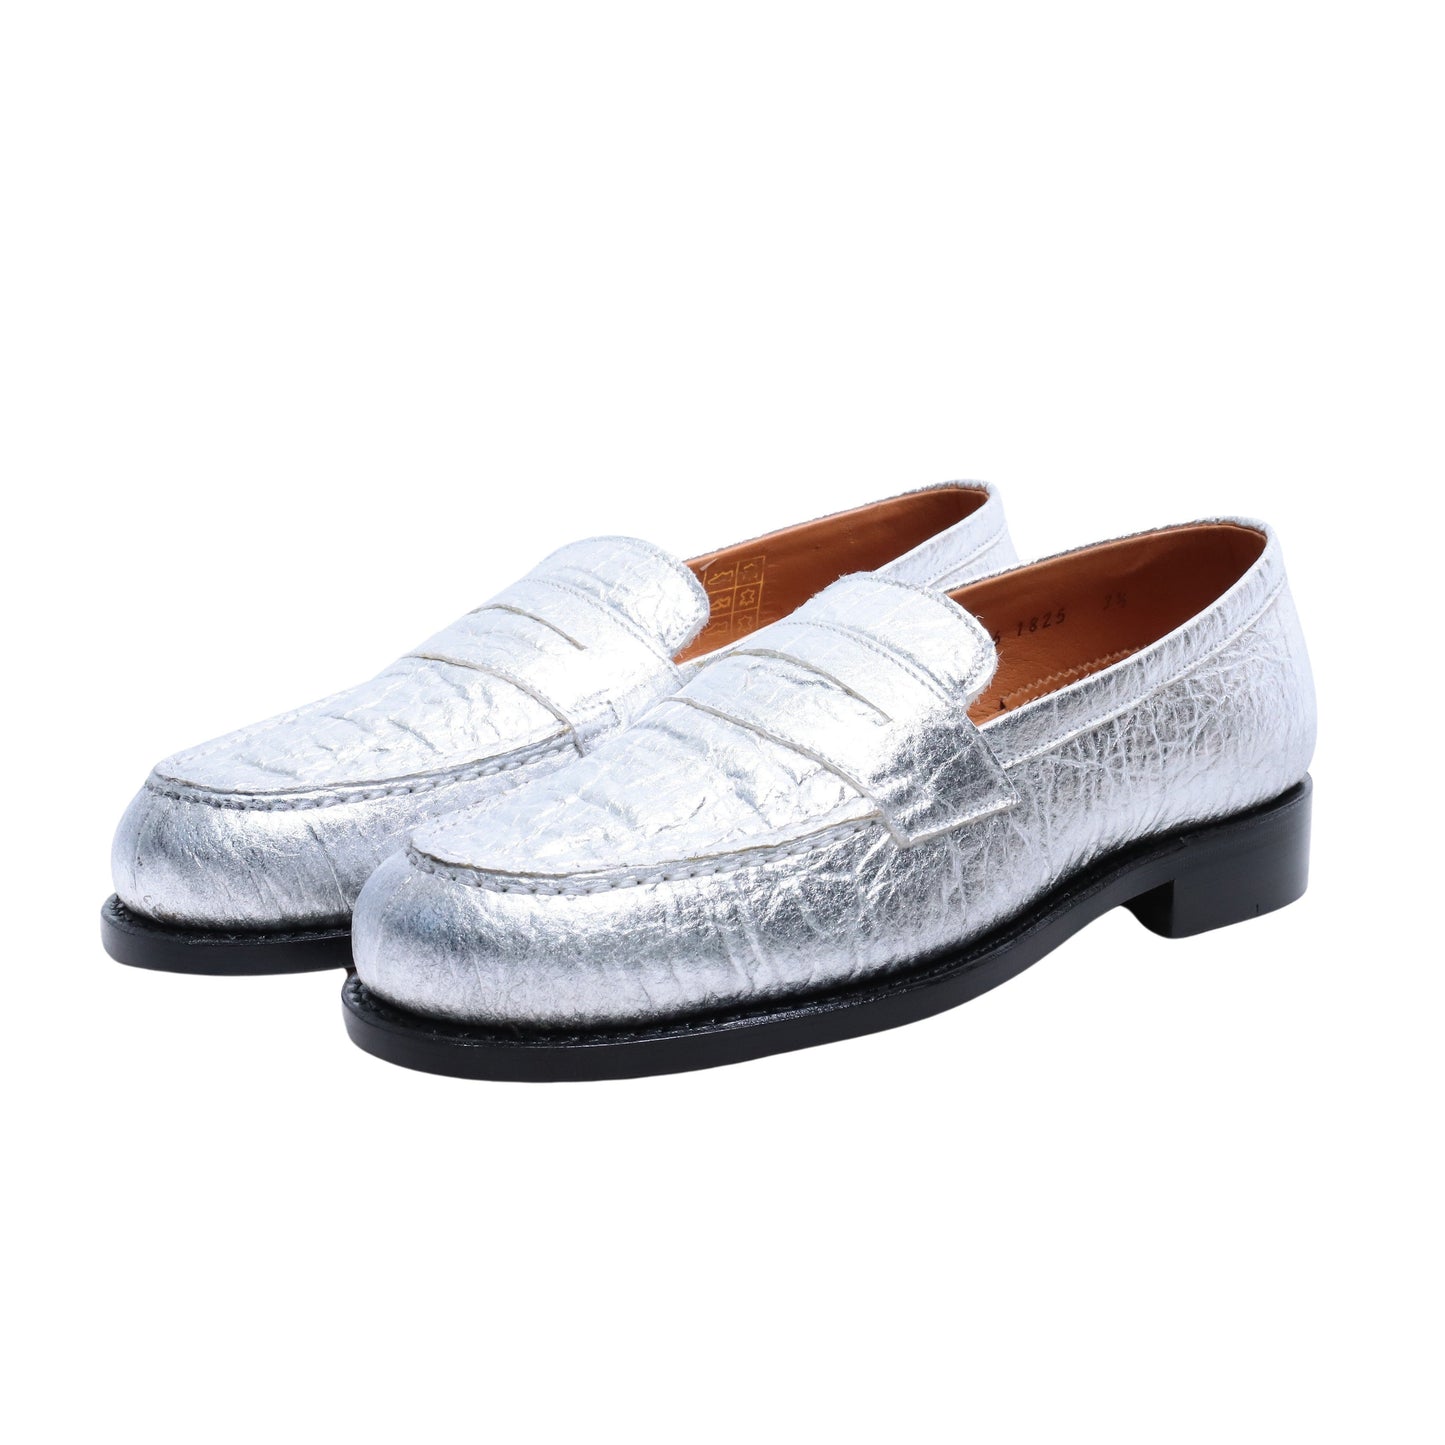 99036 / PINATEX / SILVER / LEATHER SOLE / UK3.5(22.5cm)